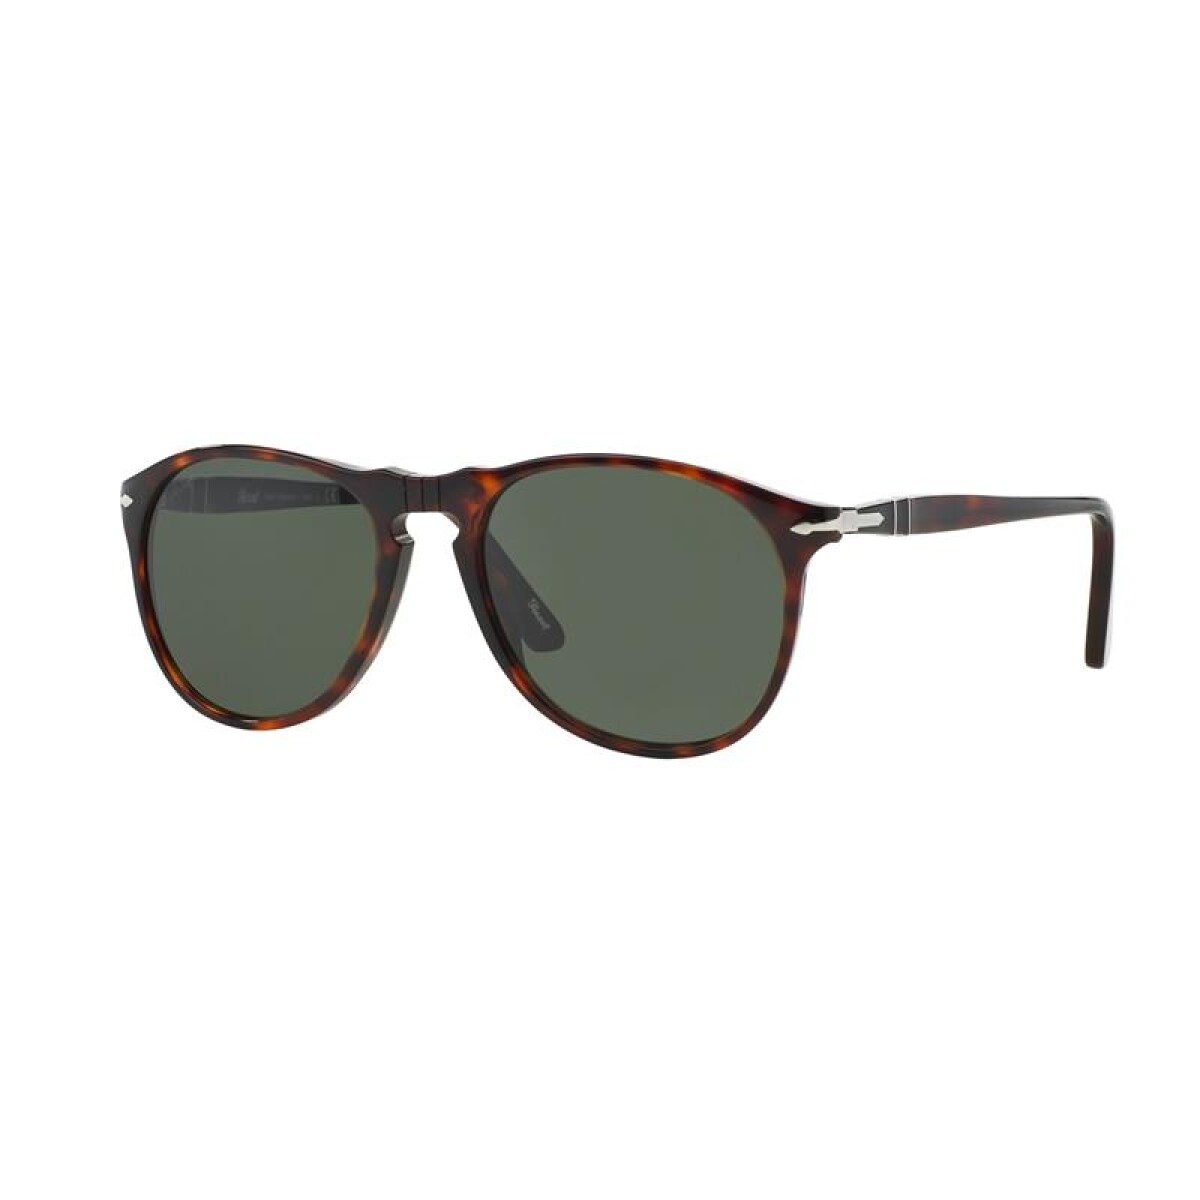 Persol 9649-s - 24/31 